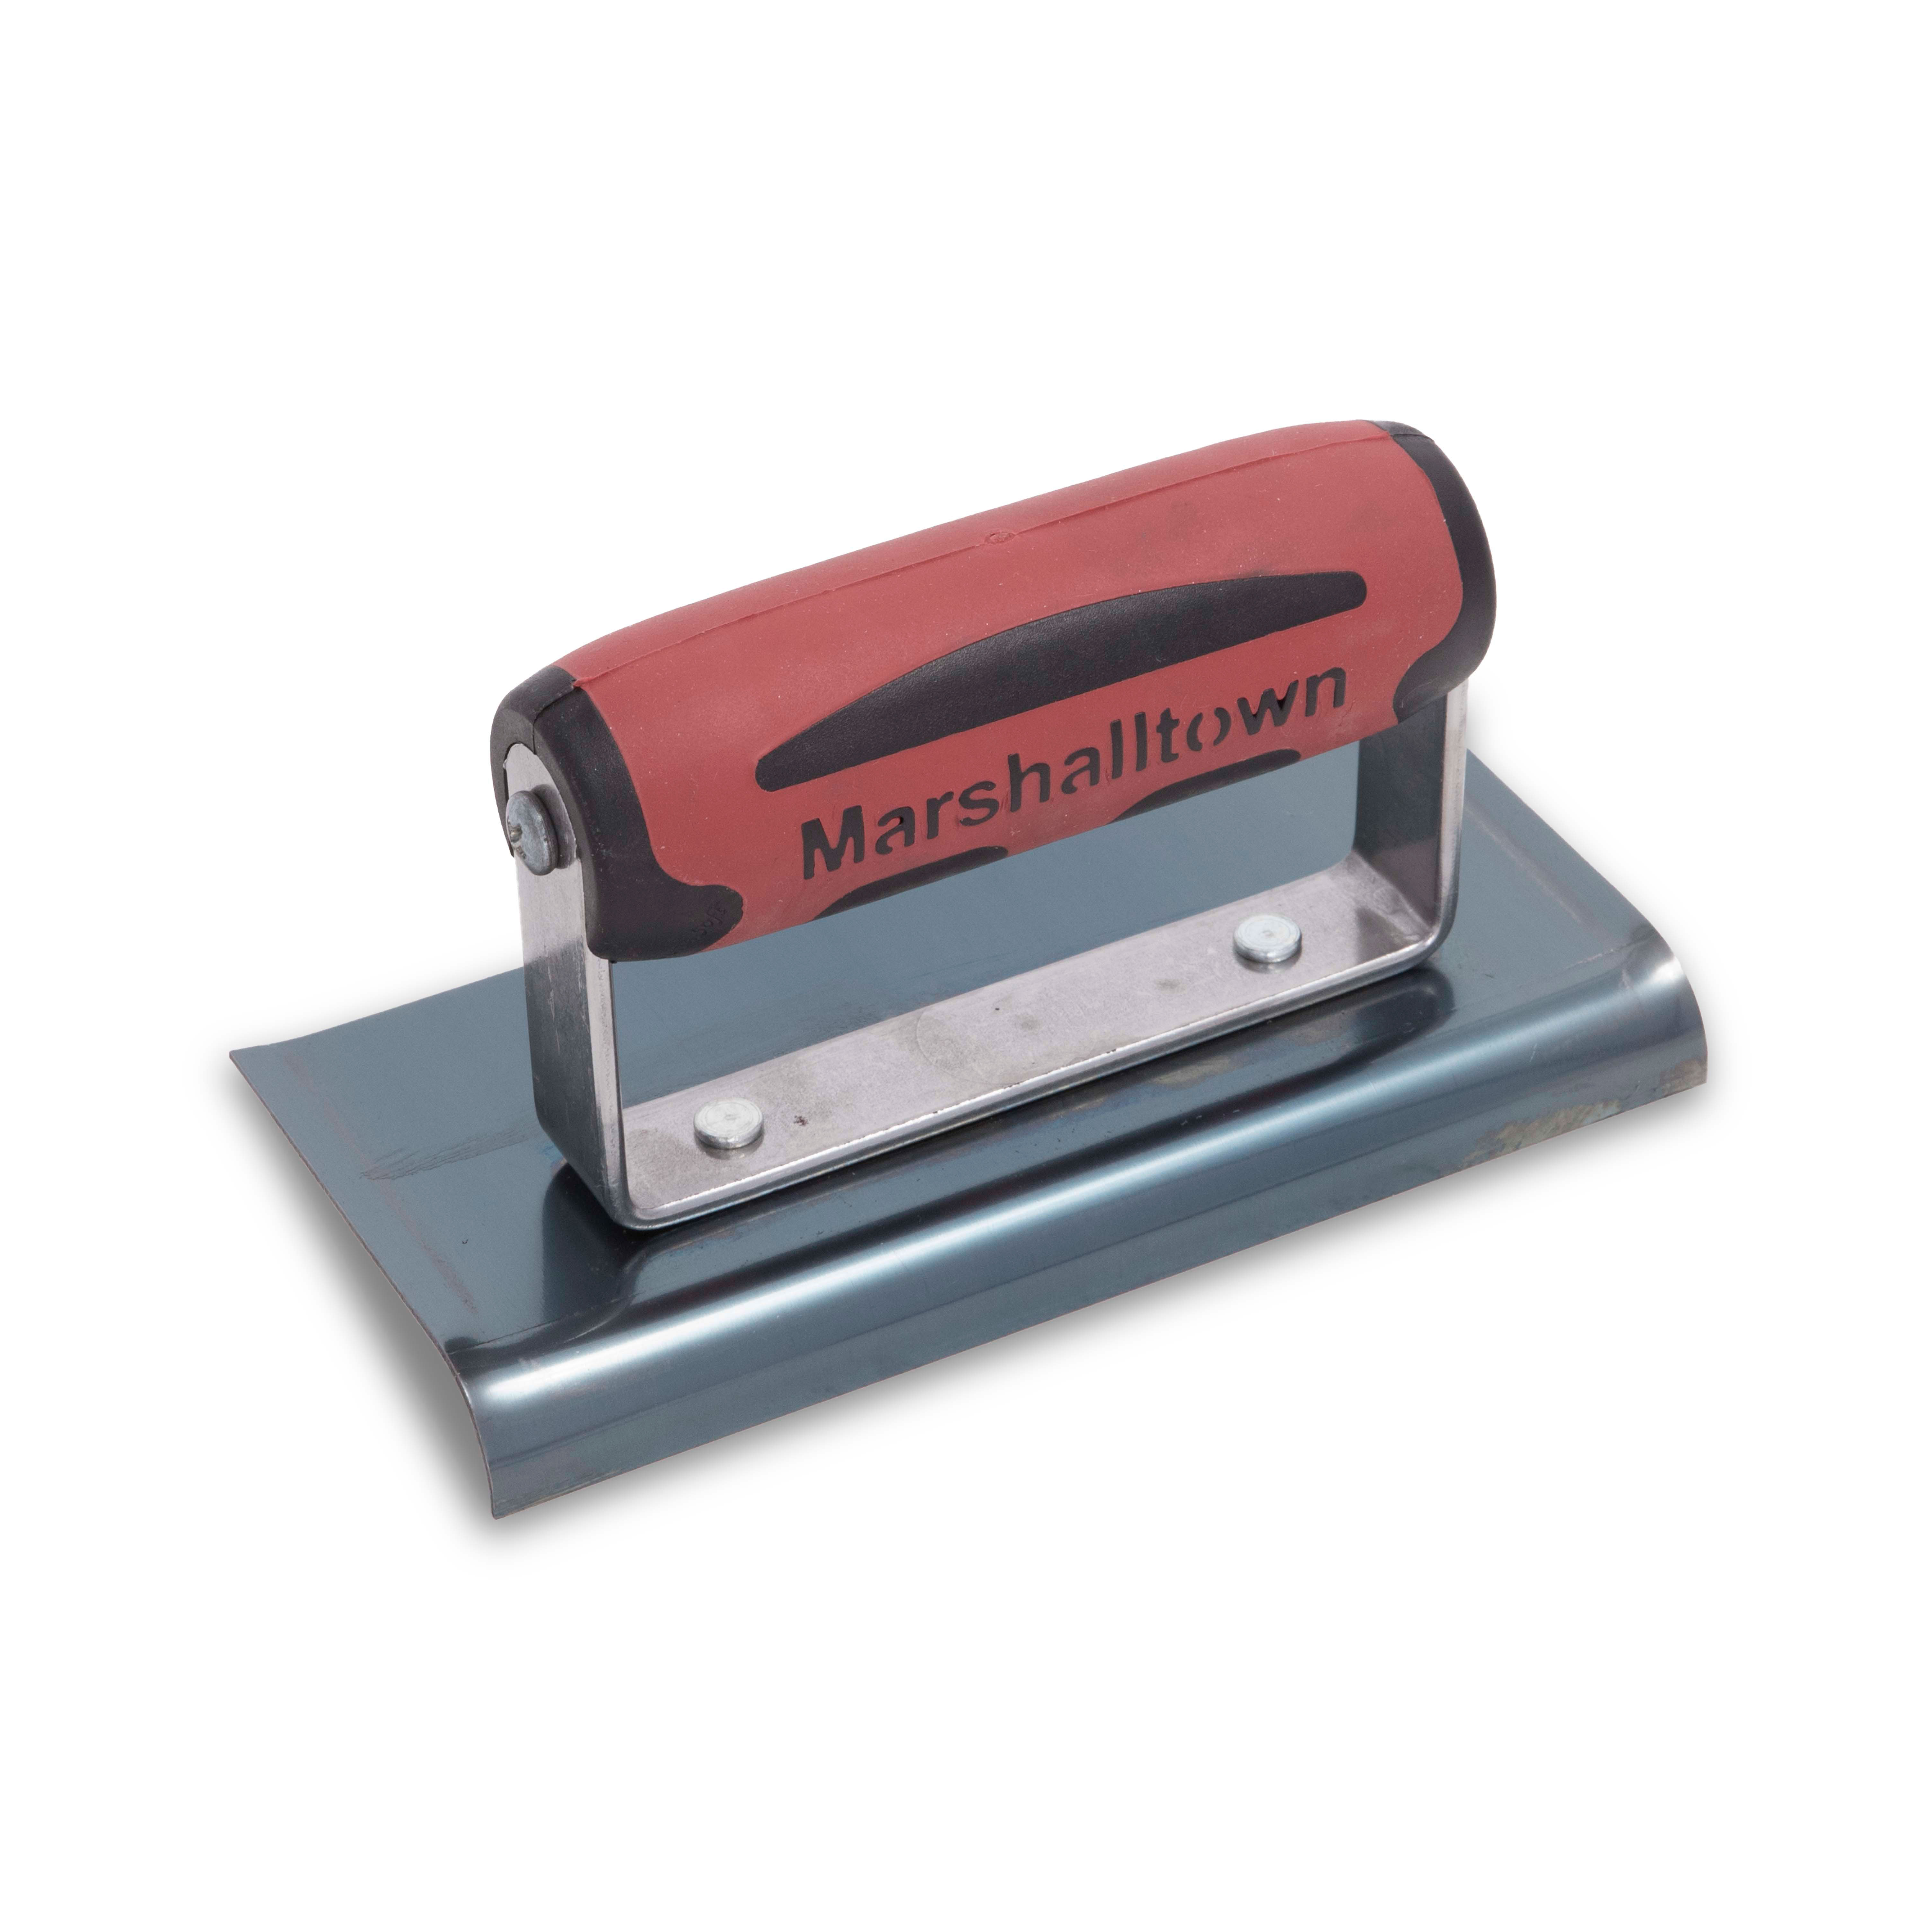 Marshalltown 136BD 6in x 3in Blue Steel Edger-Curved Ends 3/8R, 1/2L-DuraSoft Handle 136BD